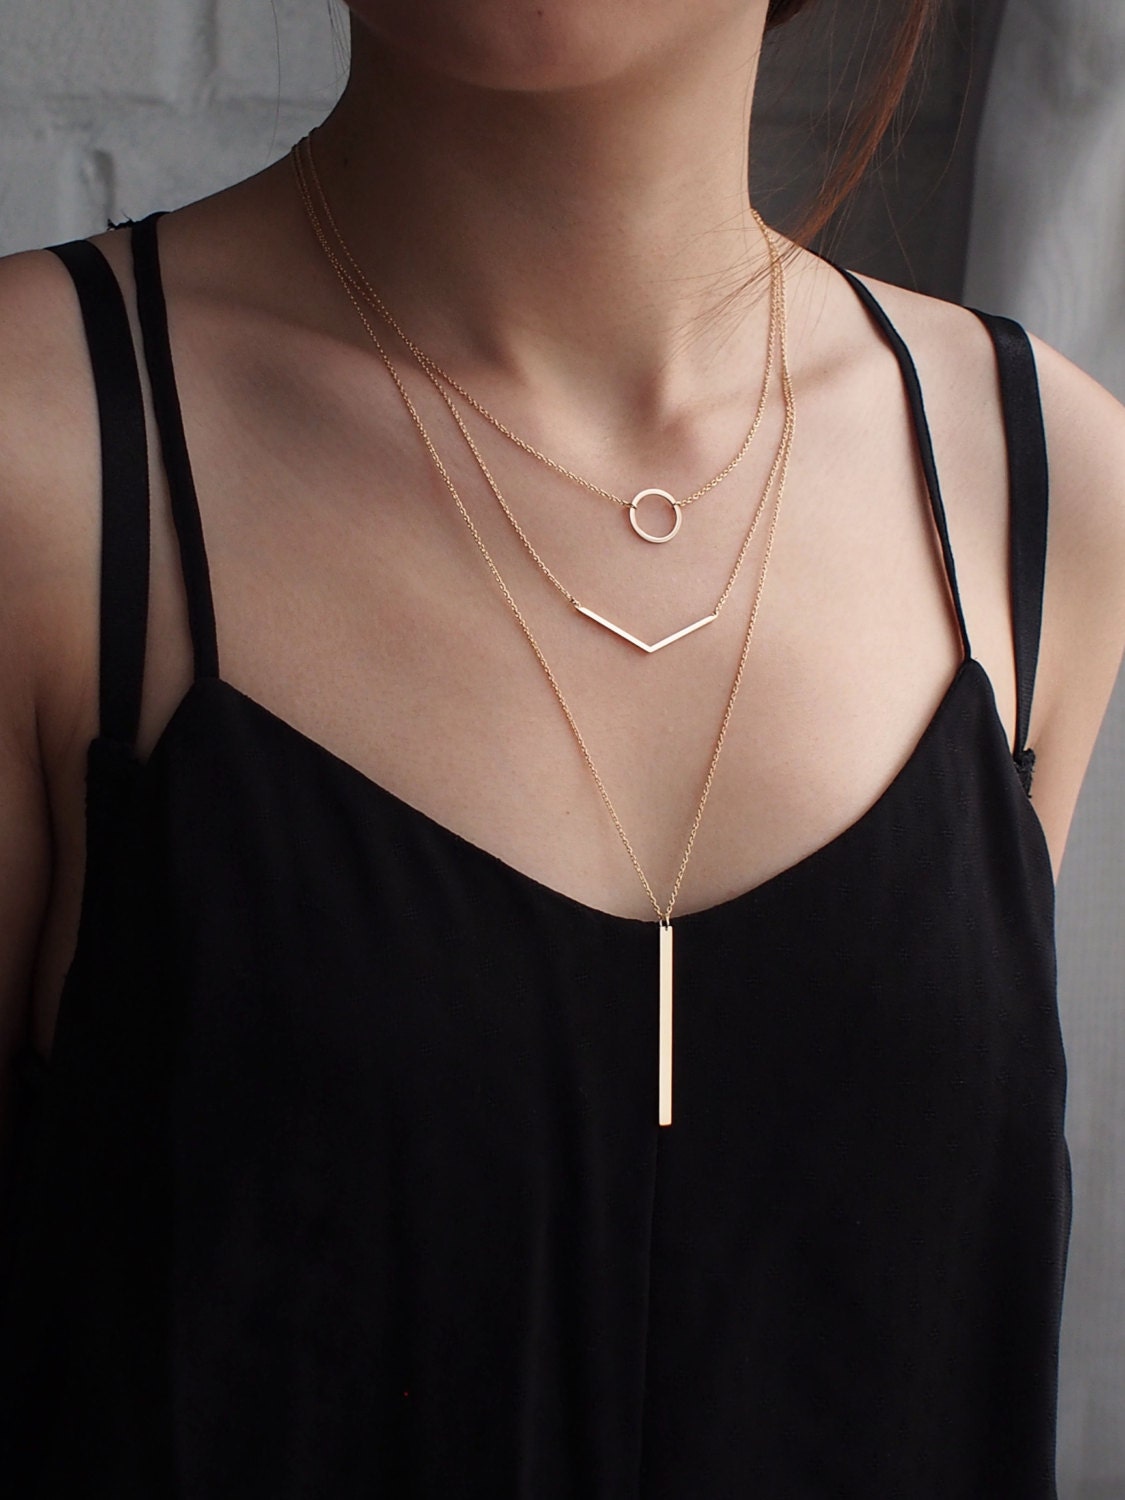 Geometric Layering Necklaces Personalized Bar Necklace